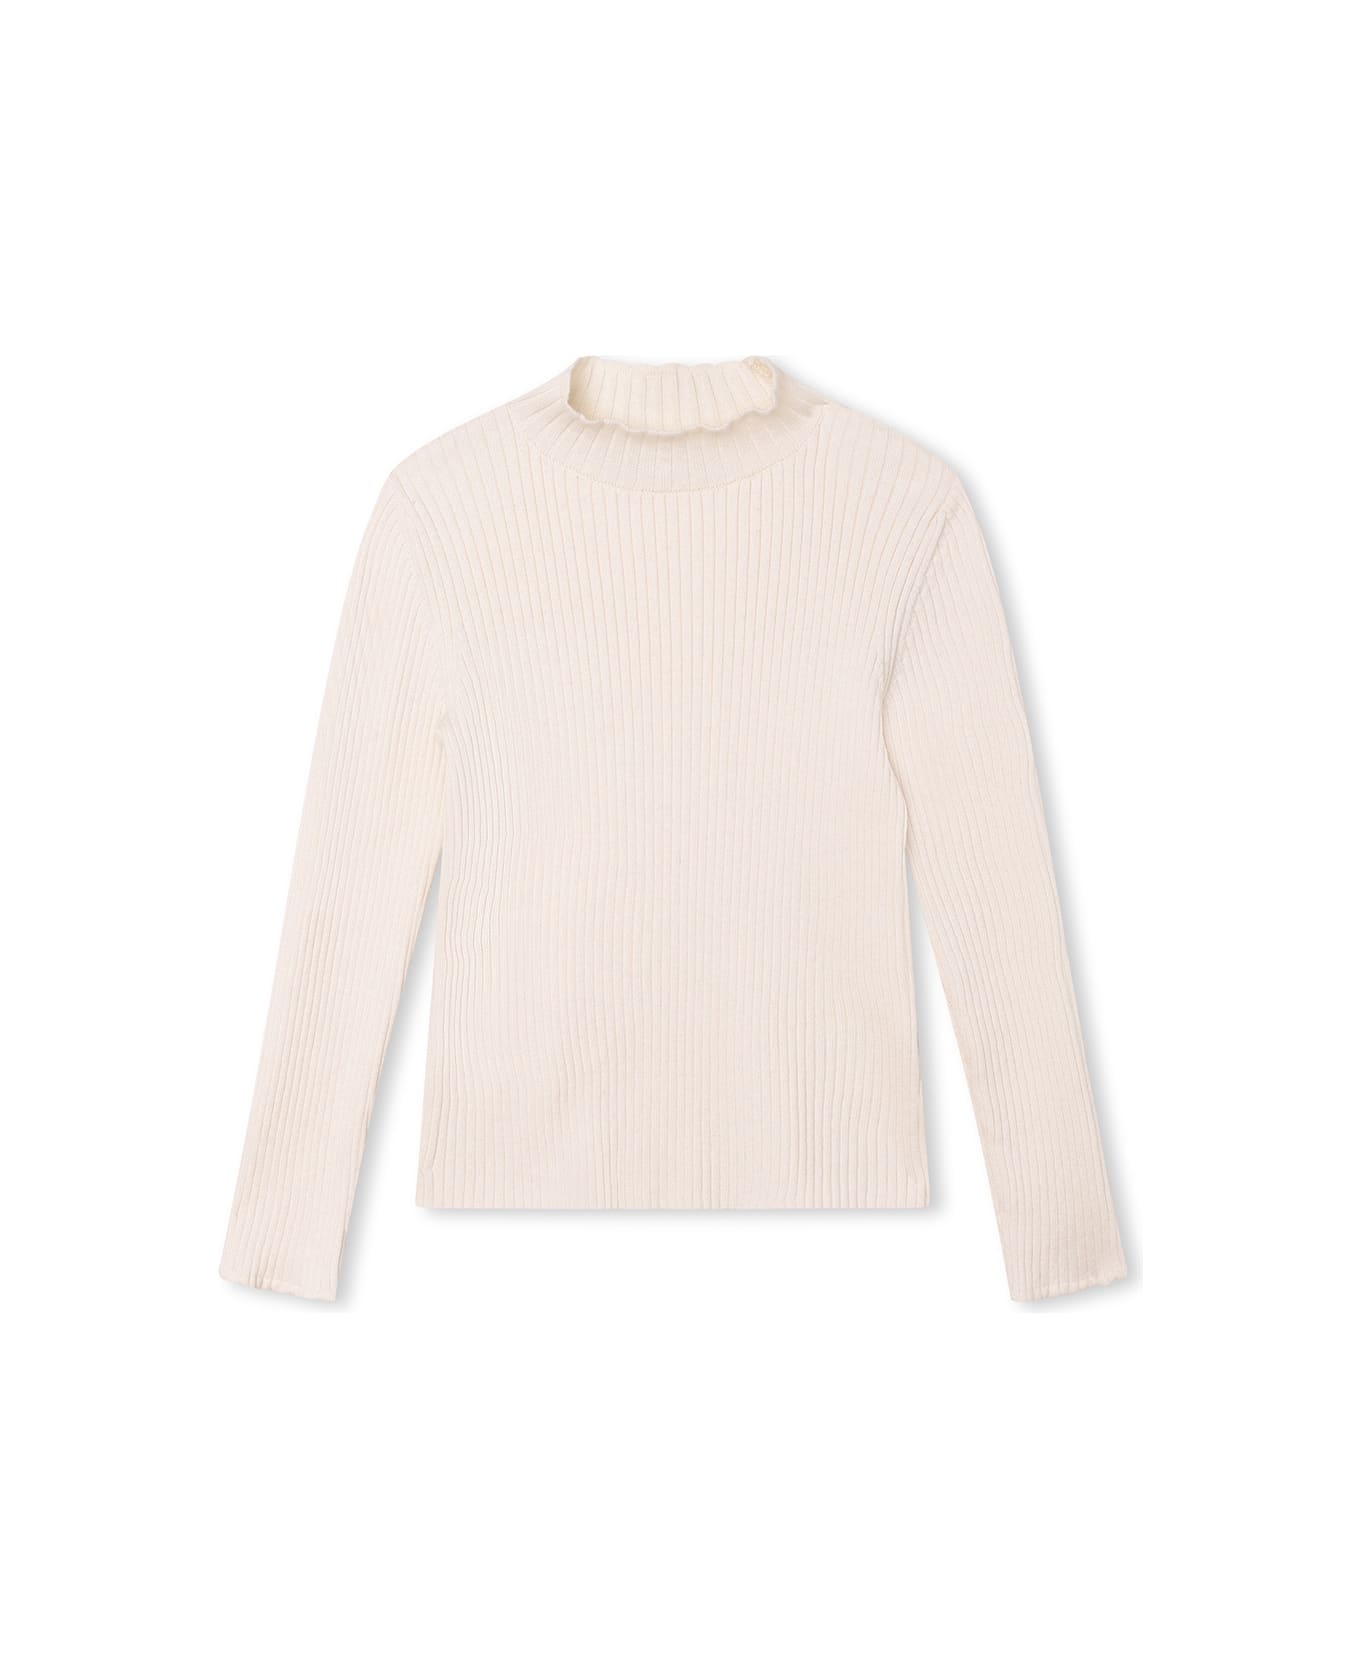 Chloé Ivory Ribbed Knitted Pullover - Avorio